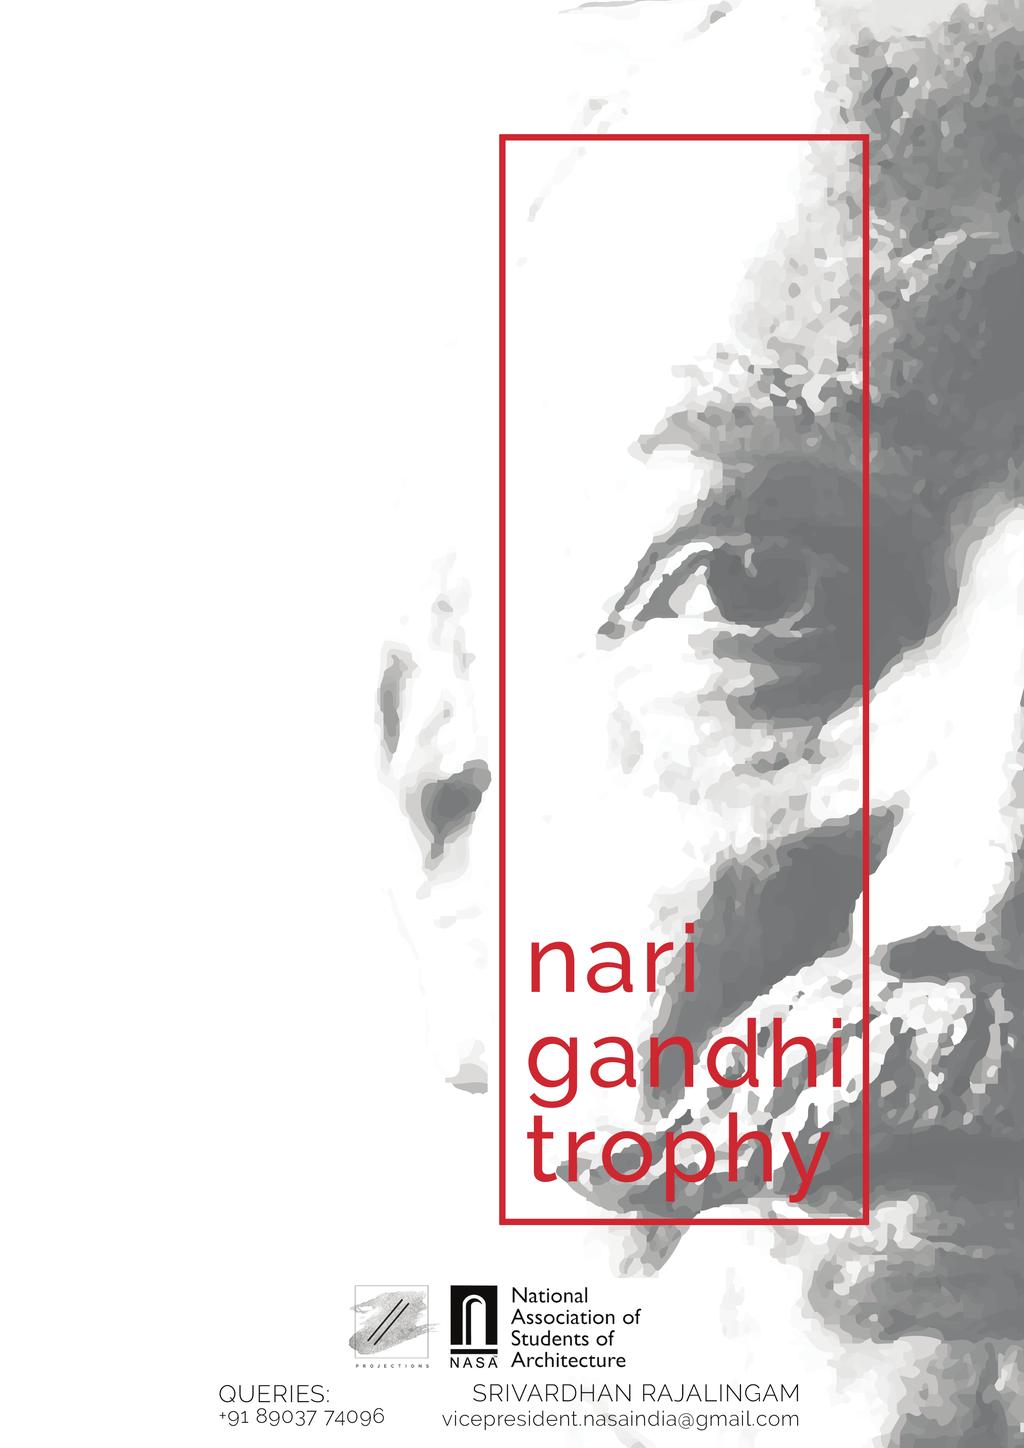 NARI GANDHI WRITING ARCHITECTURE TROPHY 2016 2016 -- 17 17 National Association of Students of Architecture